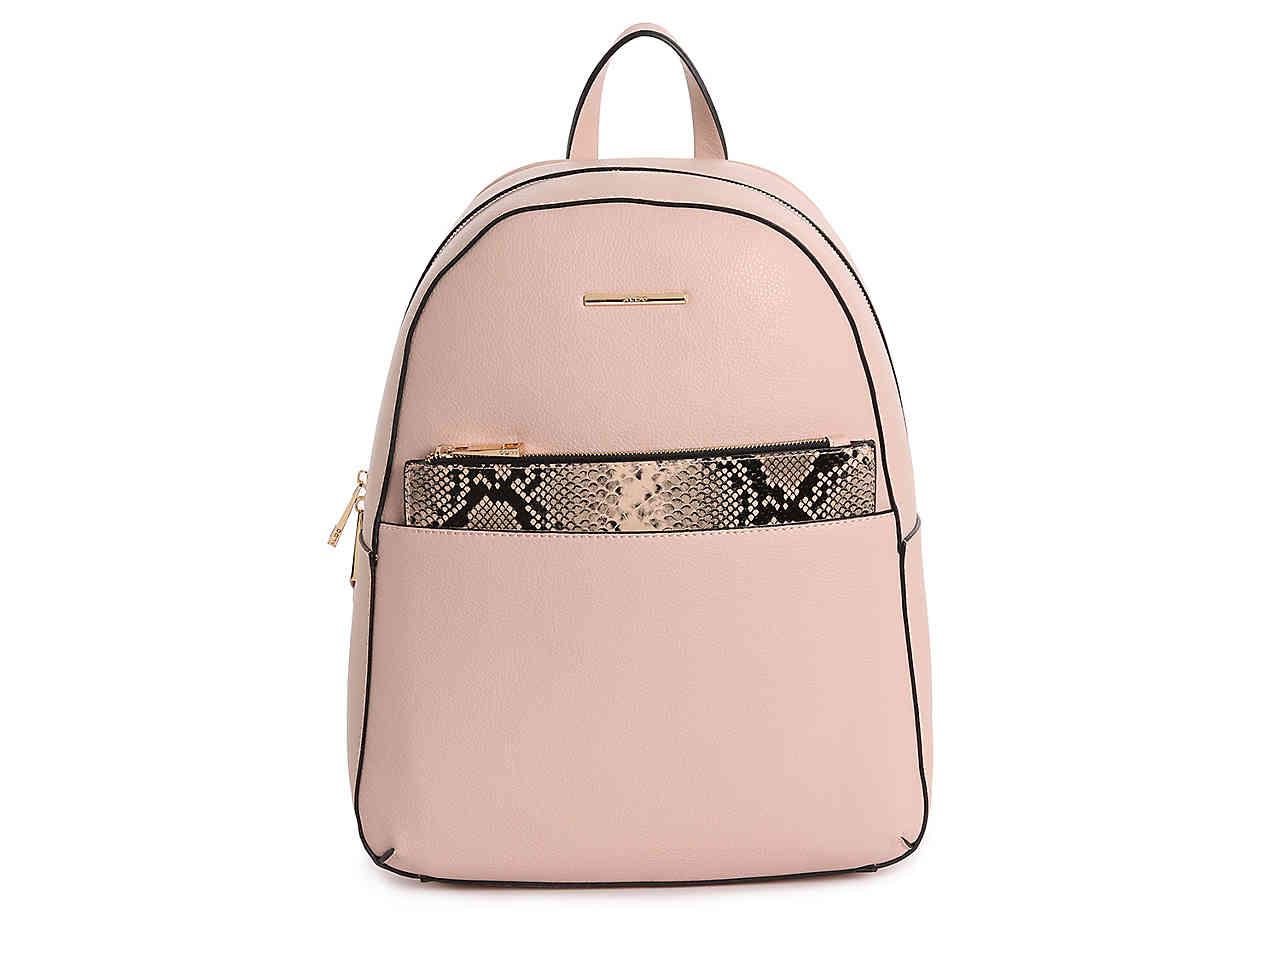 Aldo Auricelle Backpack | Leather bag women, Prom clutch bags, Backpacks